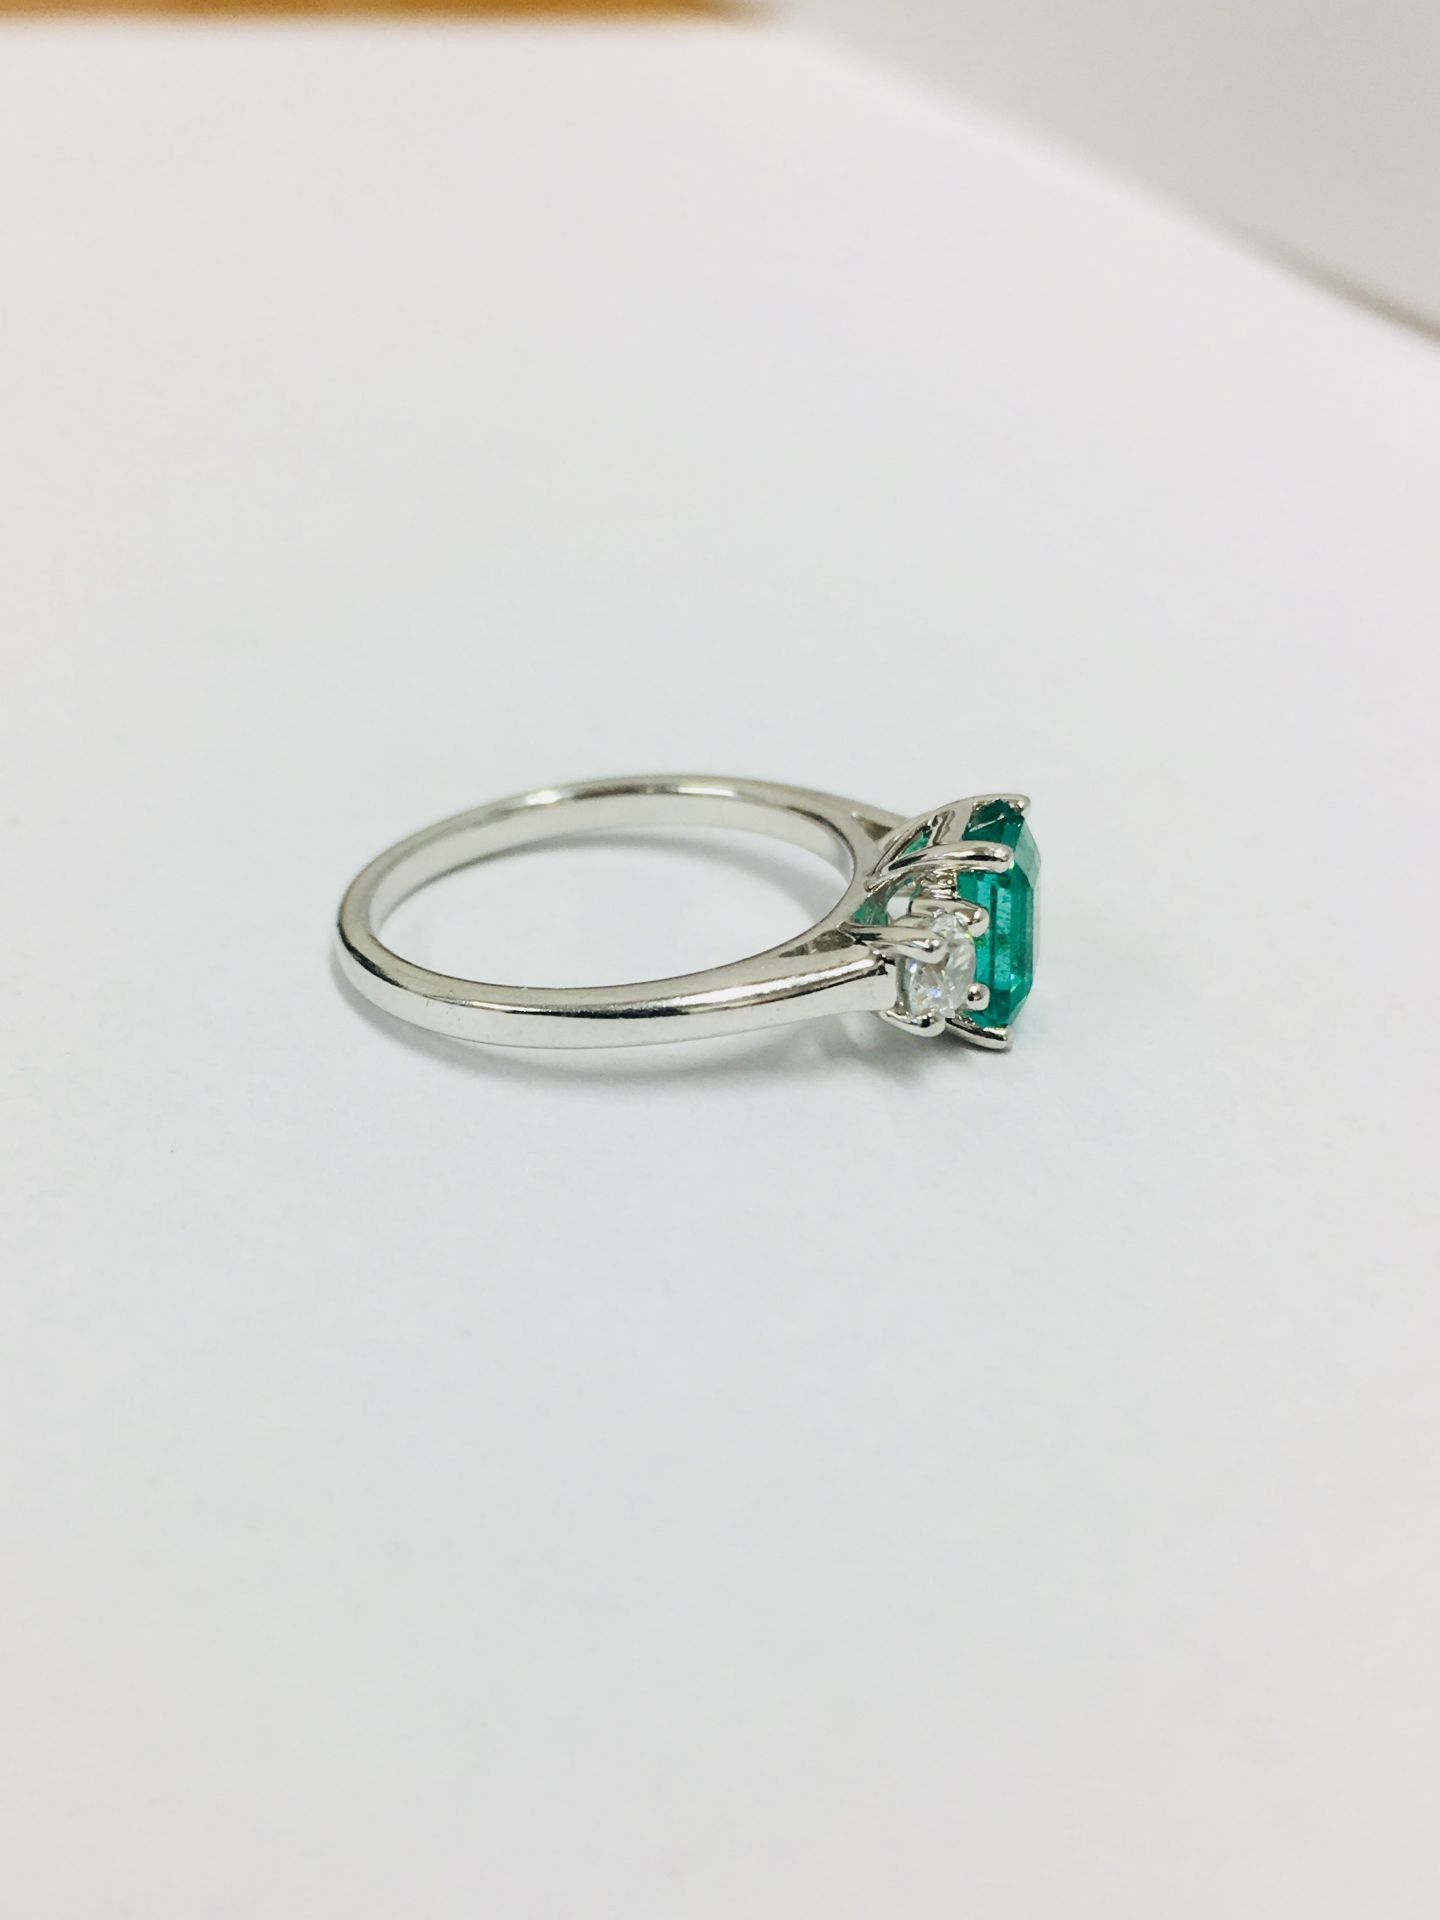 Emerald and diamond trilogy style ring. Rectangular cut emerald ( treated ) 0.70ct with a - Image 5 of 5